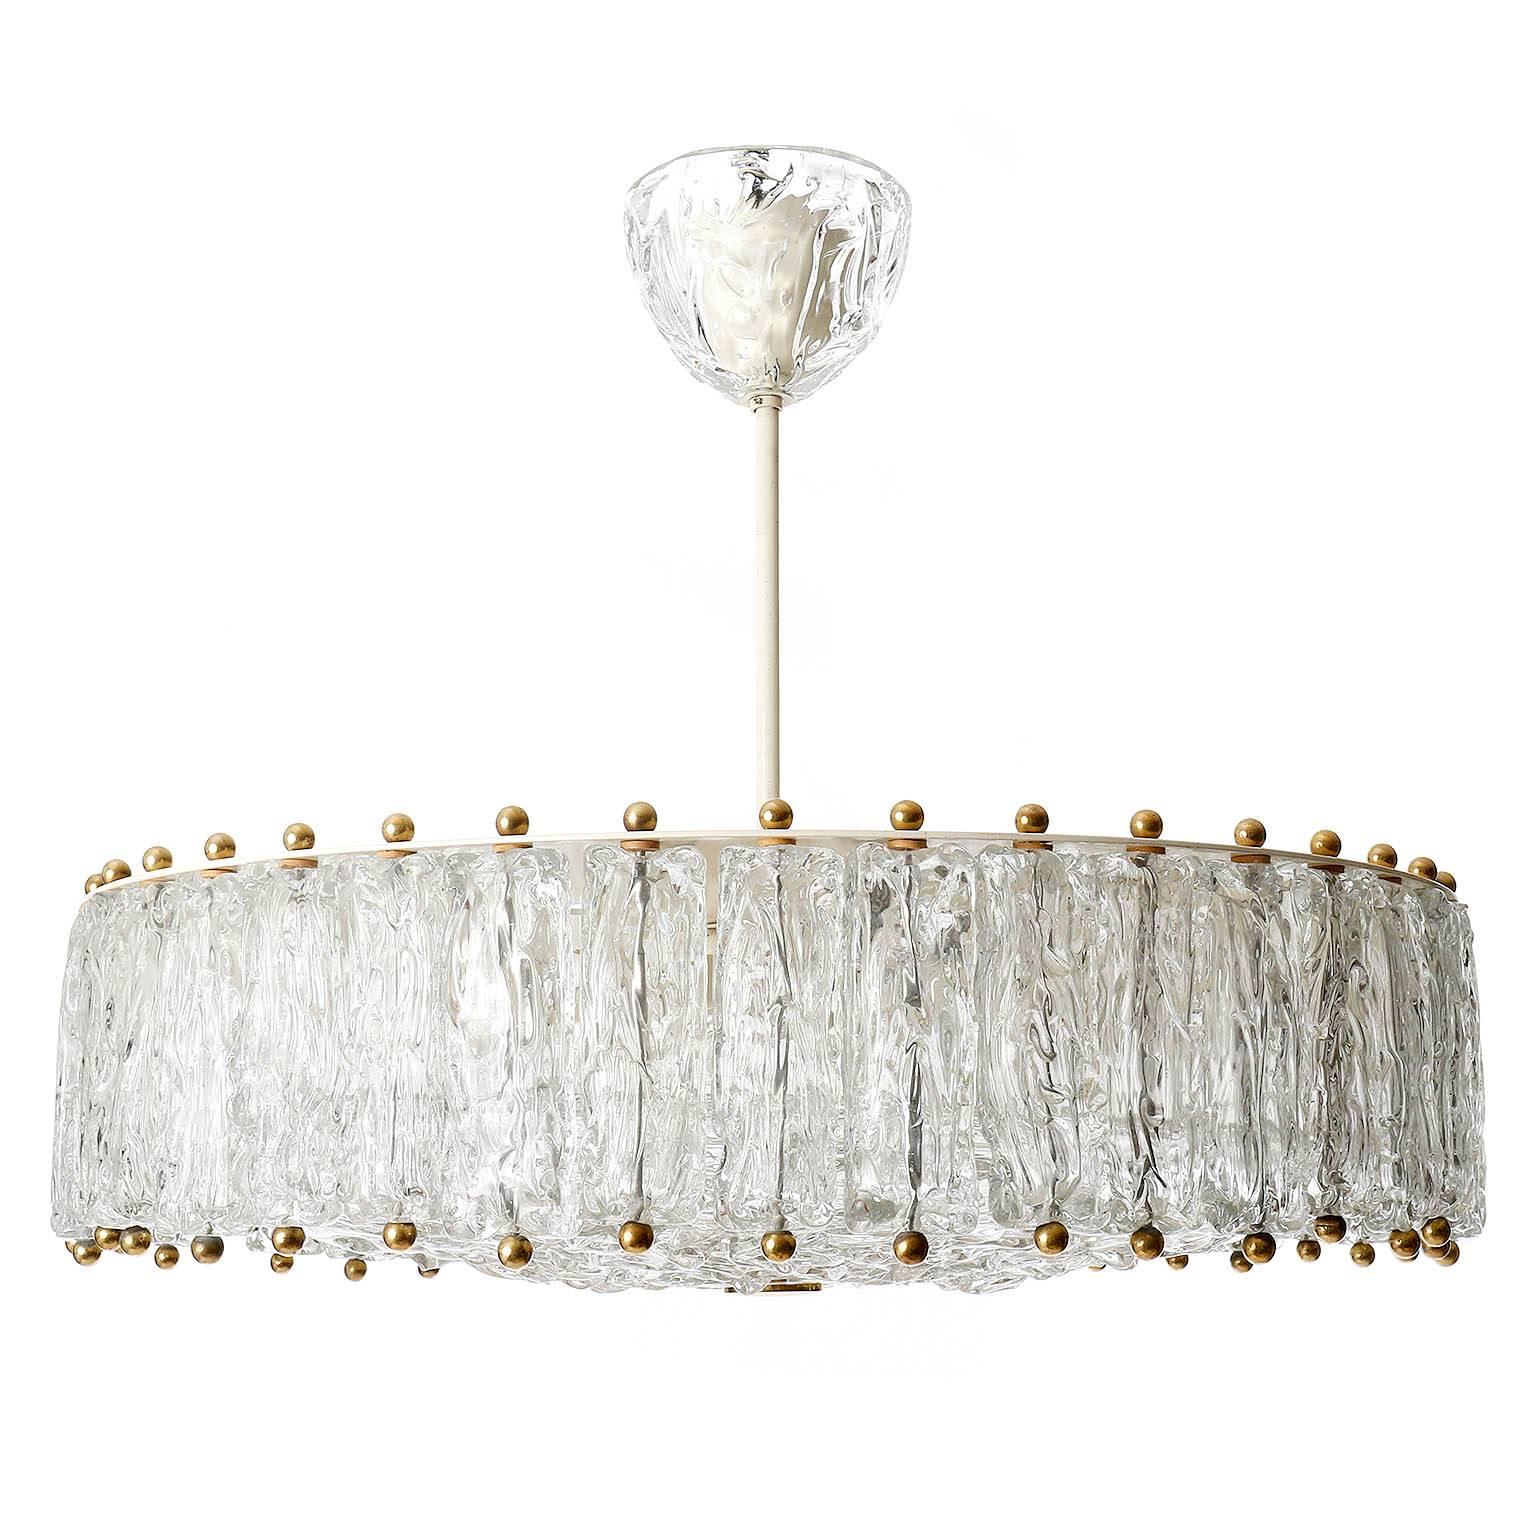 A large textured glass chandeliers or flush mounts by Vereinigte Werkstätten München, Germany, manufactured in Mid-Century, circa 1960.
Several glasses hung around a glass disk with brass hardware.
The glass is attributed to Aureliano Toso, circa